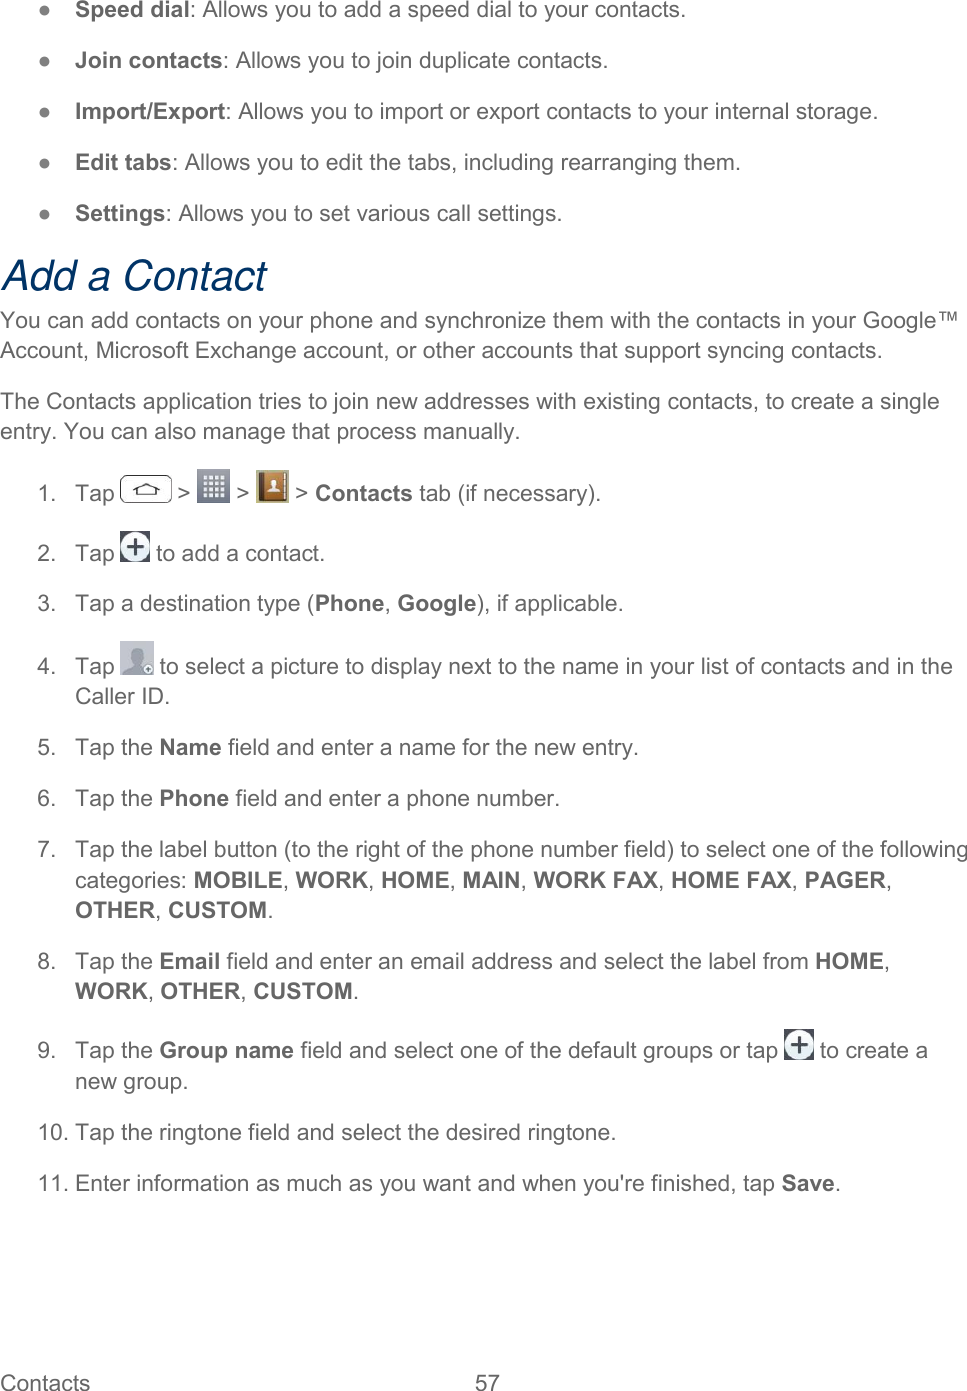  Contacts  57   ●  Speed dial: Allows you to add a speed dial to your contacts. ●  Join contacts: Allows you to join duplicate contacts. ●  Import/Export: Allows you to import or export contacts to your internal storage. ●  Edit tabs: Allows you to edit the tabs, including rearranging them. ●  Settings: Allows you to set various call settings. Add a Contact You can add contacts on your phone and synchronize them with the contacts in your Google™ Account, Microsoft Exchange account, or other accounts that support syncing contacts. The Contacts application tries to join new addresses with existing contacts, to create a single entry. You can also manage that process manually. 1.  Tap   &gt;   &gt;   &gt; Contacts tab (if necessary). 2.  Tap   to add a contact. 3.  Tap a destination type (Phone, Google), if applicable. 4.  Tap   to select a picture to display next to the name in your list of contacts and in the Caller ID. 5.  Tap the Name field and enter a name for the new entry.  6.  Tap the Phone field and enter a phone number.  7.  Tap the label button (to the right of the phone number field) to select one of the following categories: MOBILE, WORK, HOME, MAIN, WORK FAX, HOME FAX, PAGER, OTHER, CUSTOM. 8.  Tap the Email field and enter an email address and select the label from HOME, WORK, OTHER, CUSTOM. 9.  Tap the Group name field and select one of the default groups or tap   to create a new group. 10. Tap the ringtone field and select the desired ringtone. 11. Enter information as much as you want and when you&apos;re finished, tap Save. 